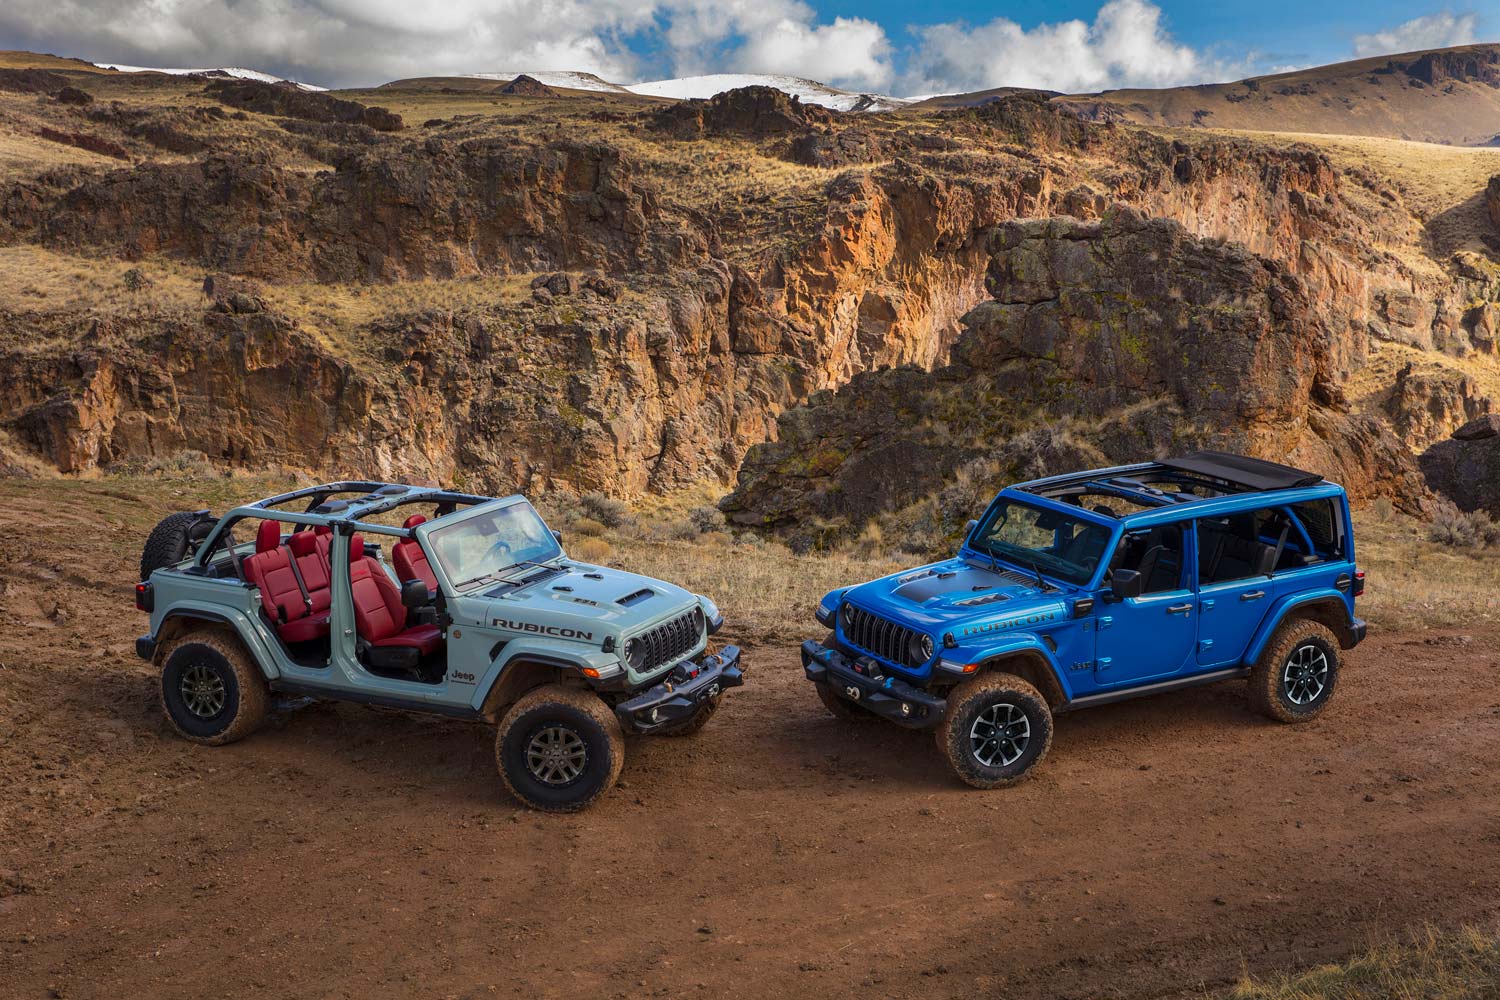 two Jeep Wrangler Unlimited models parked on dirt road